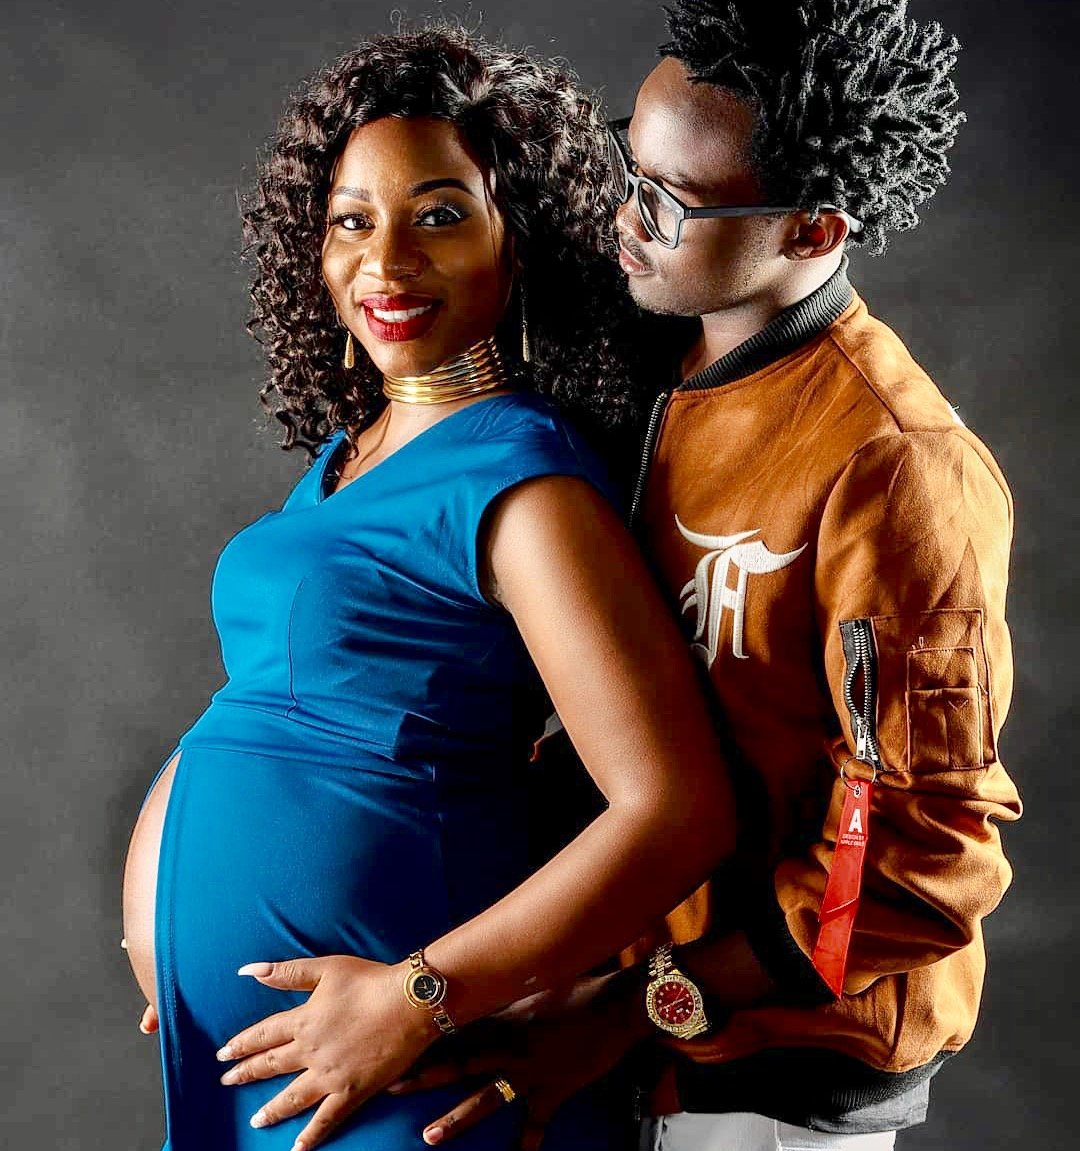 “Don’t dare write nonsense about my daughter!” Bahati warns after he was said to have carried a paternity test on his daughter